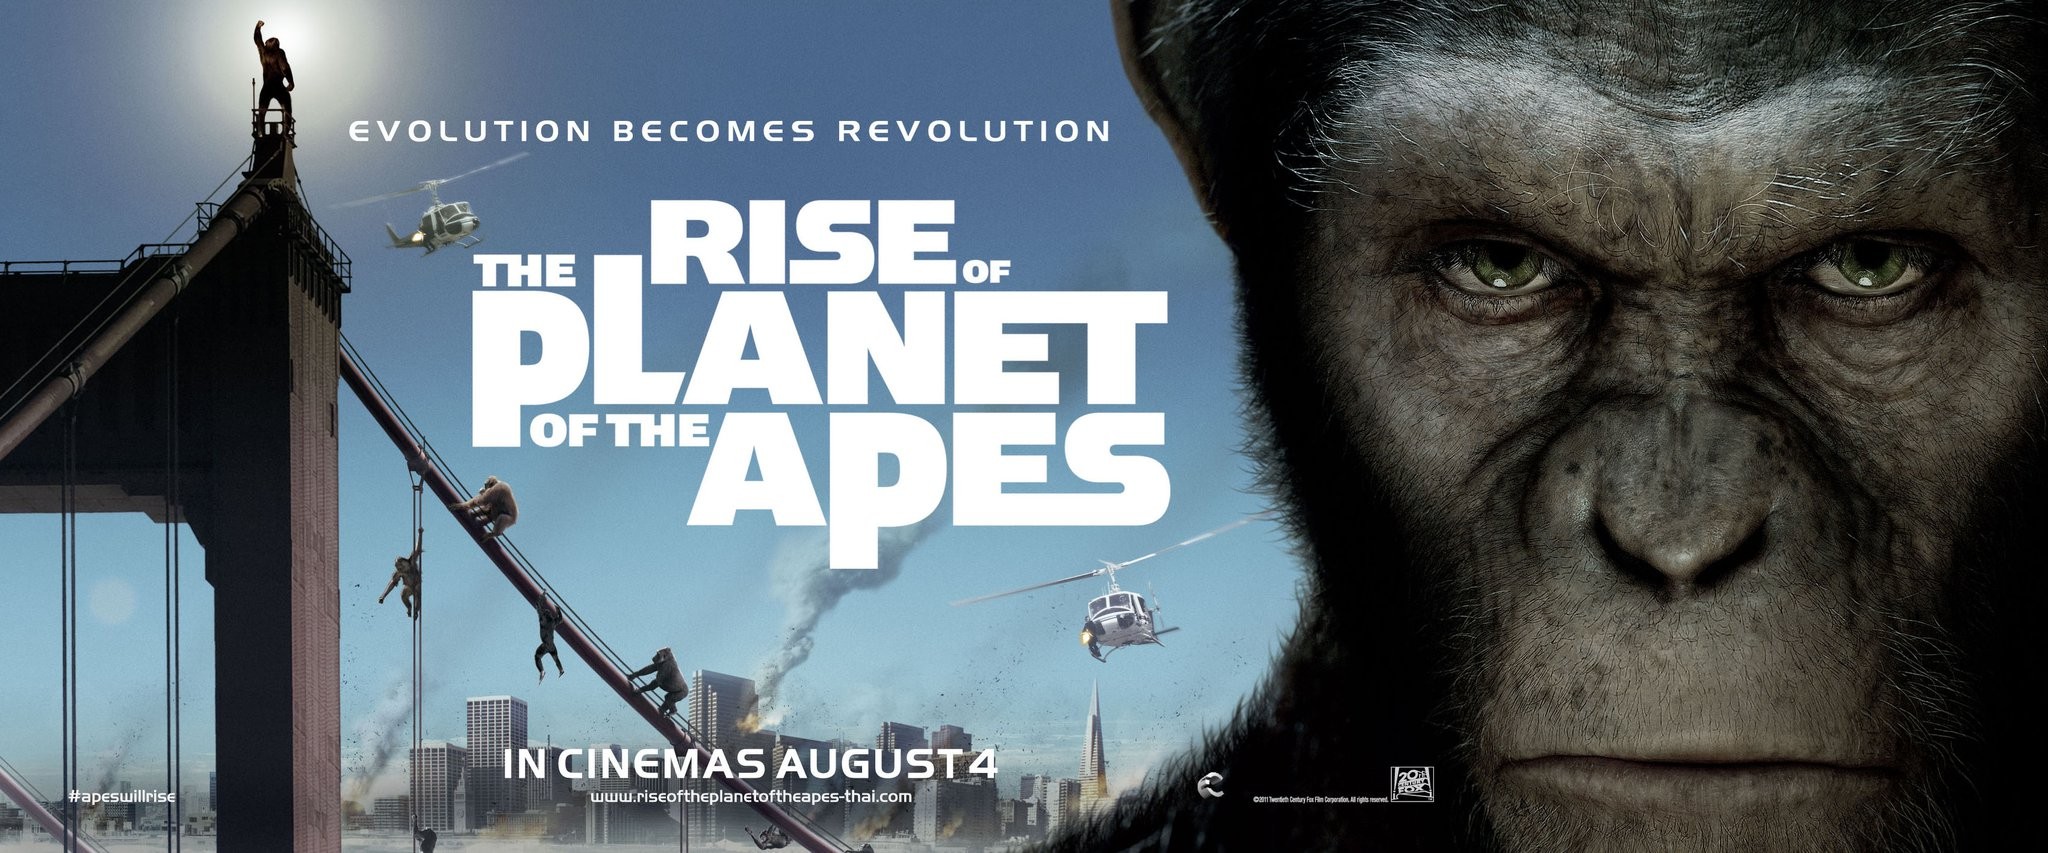 Mega Sized Movie Poster Image for Rise of the Planet of the Apes (#5 of 11)